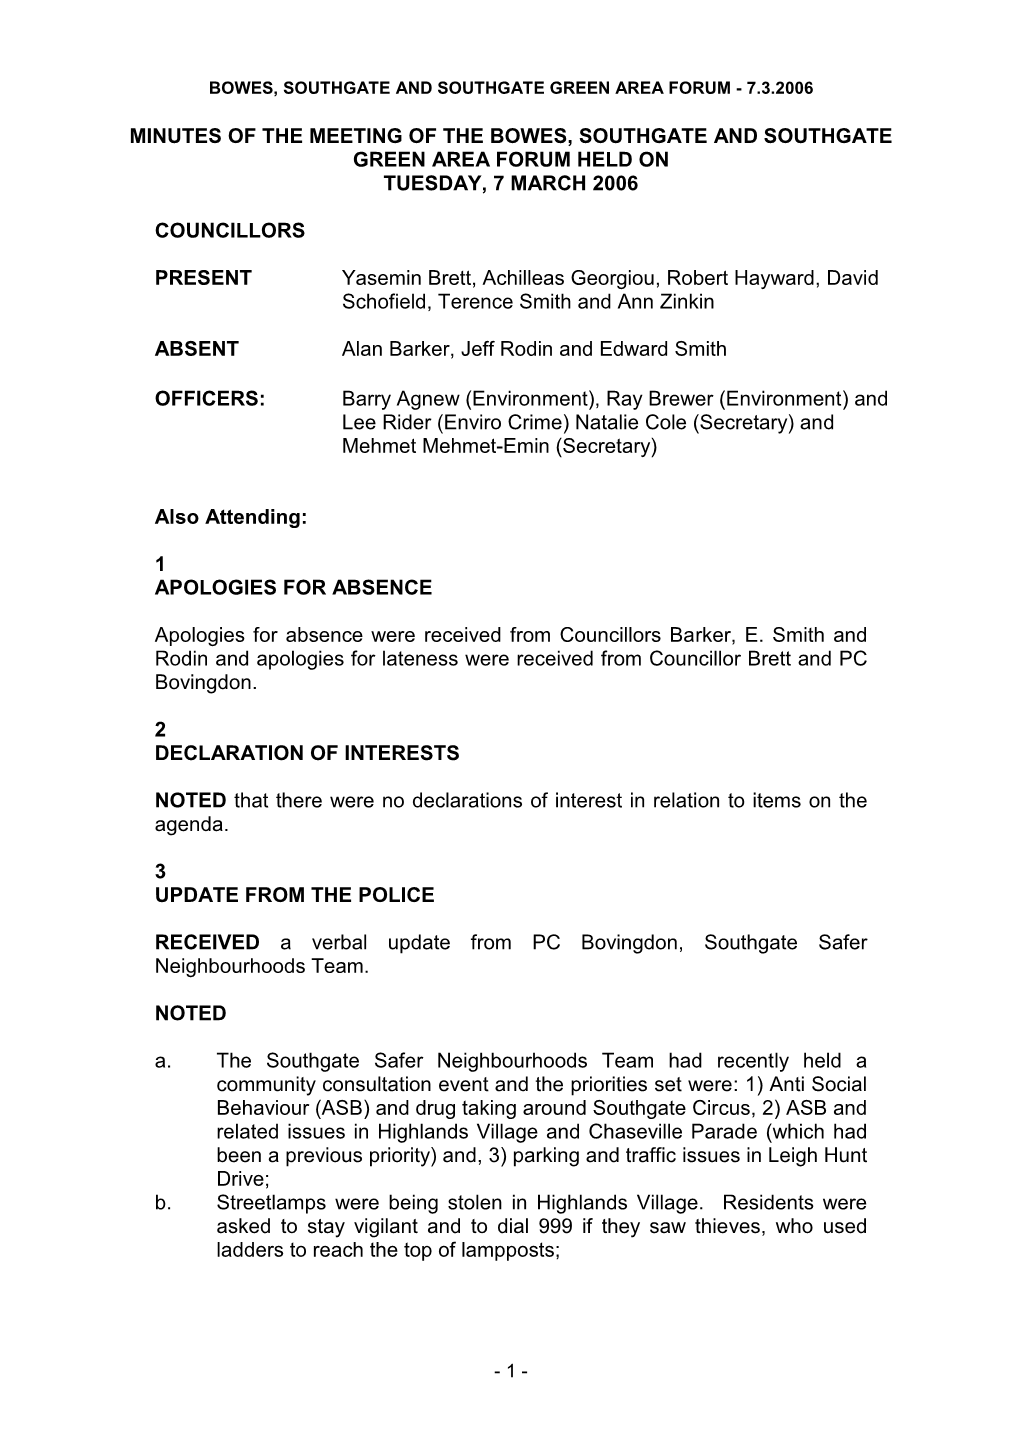 Minutes of the Meeting of the Bowes, Southgate and Southgate Green Area Forum Held on Tuesday, 7 March 2006